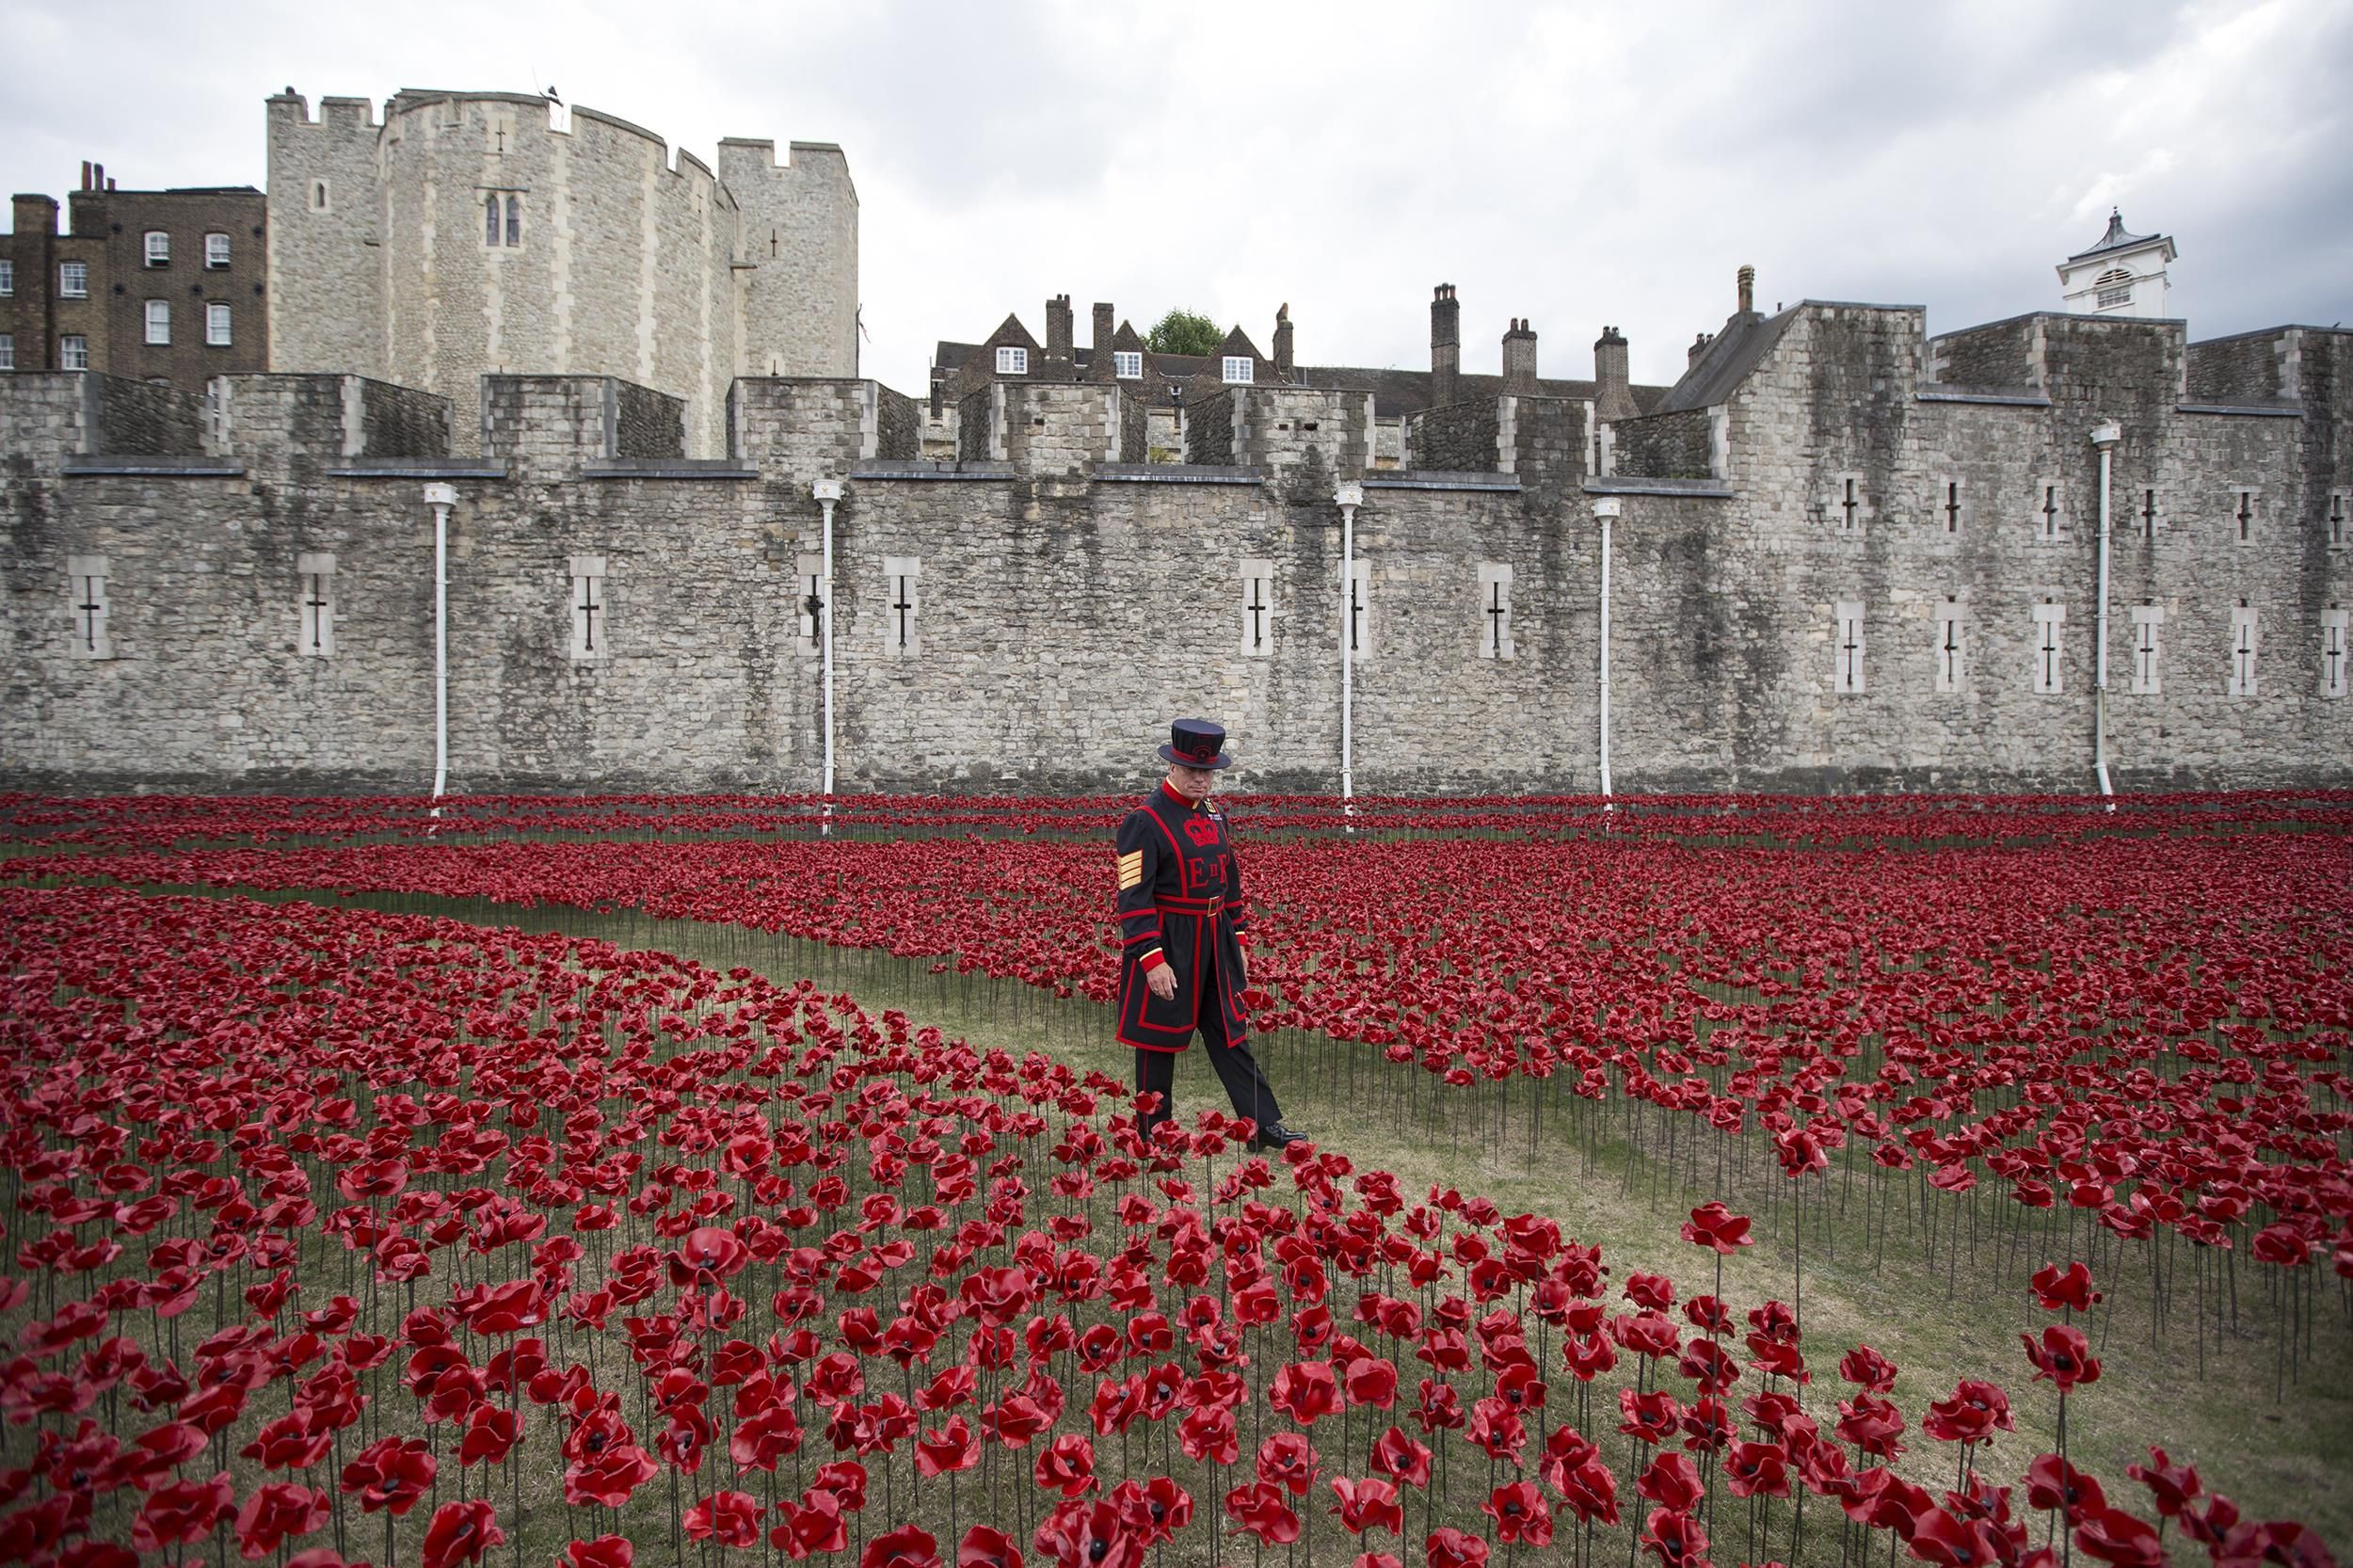 Artist Plants Ceramic Poppies to Commemorate WWI Victims - 